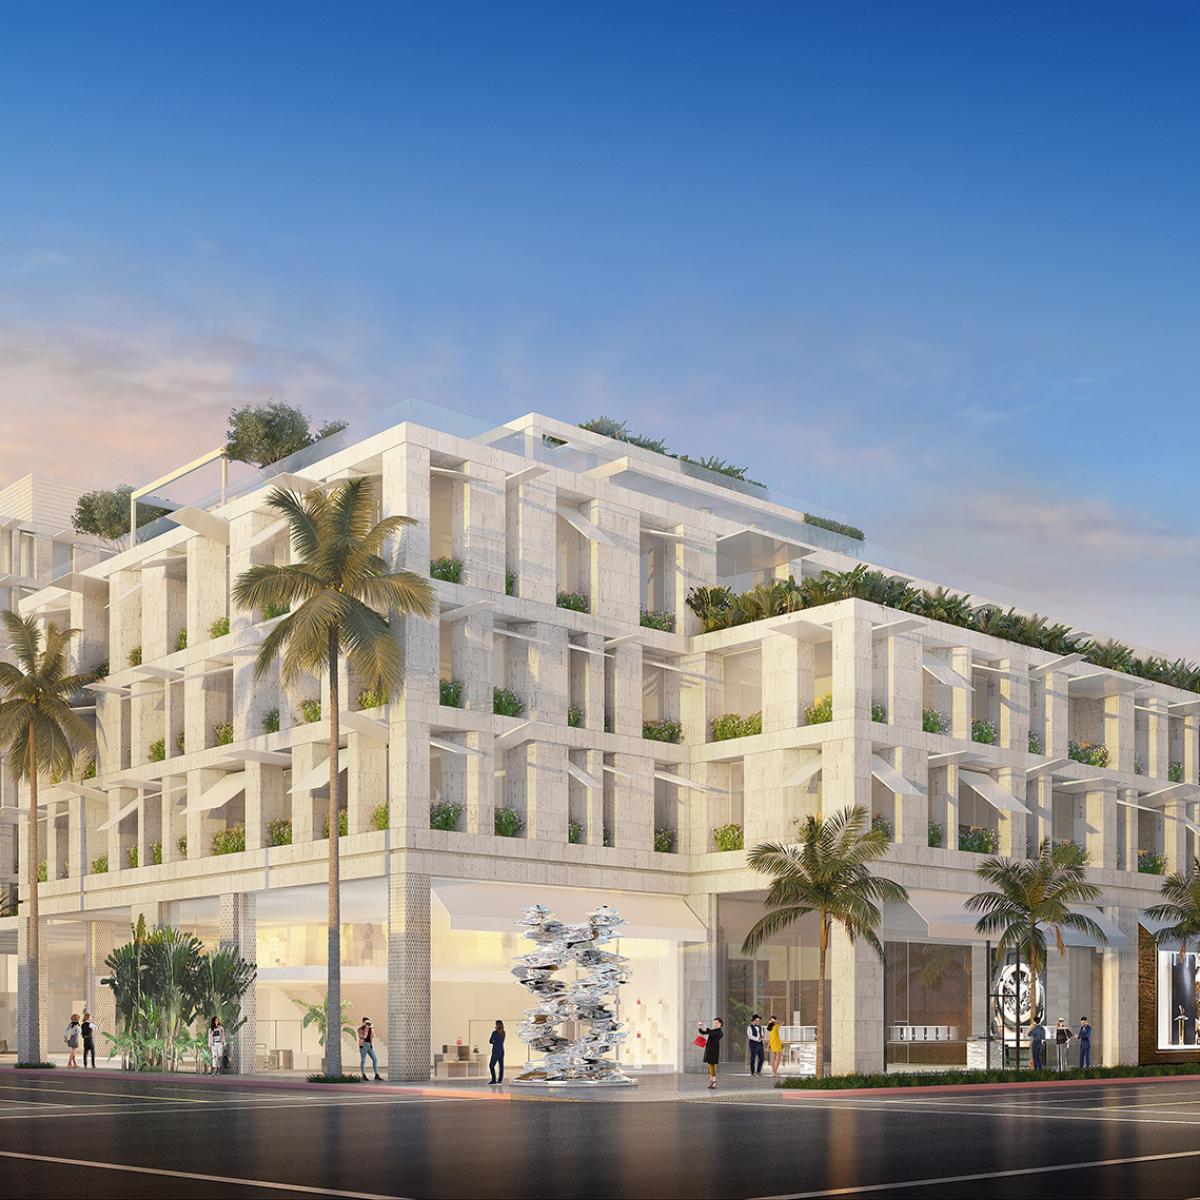 Cheval Blanc hotel continues to move forward in Beverly Hills